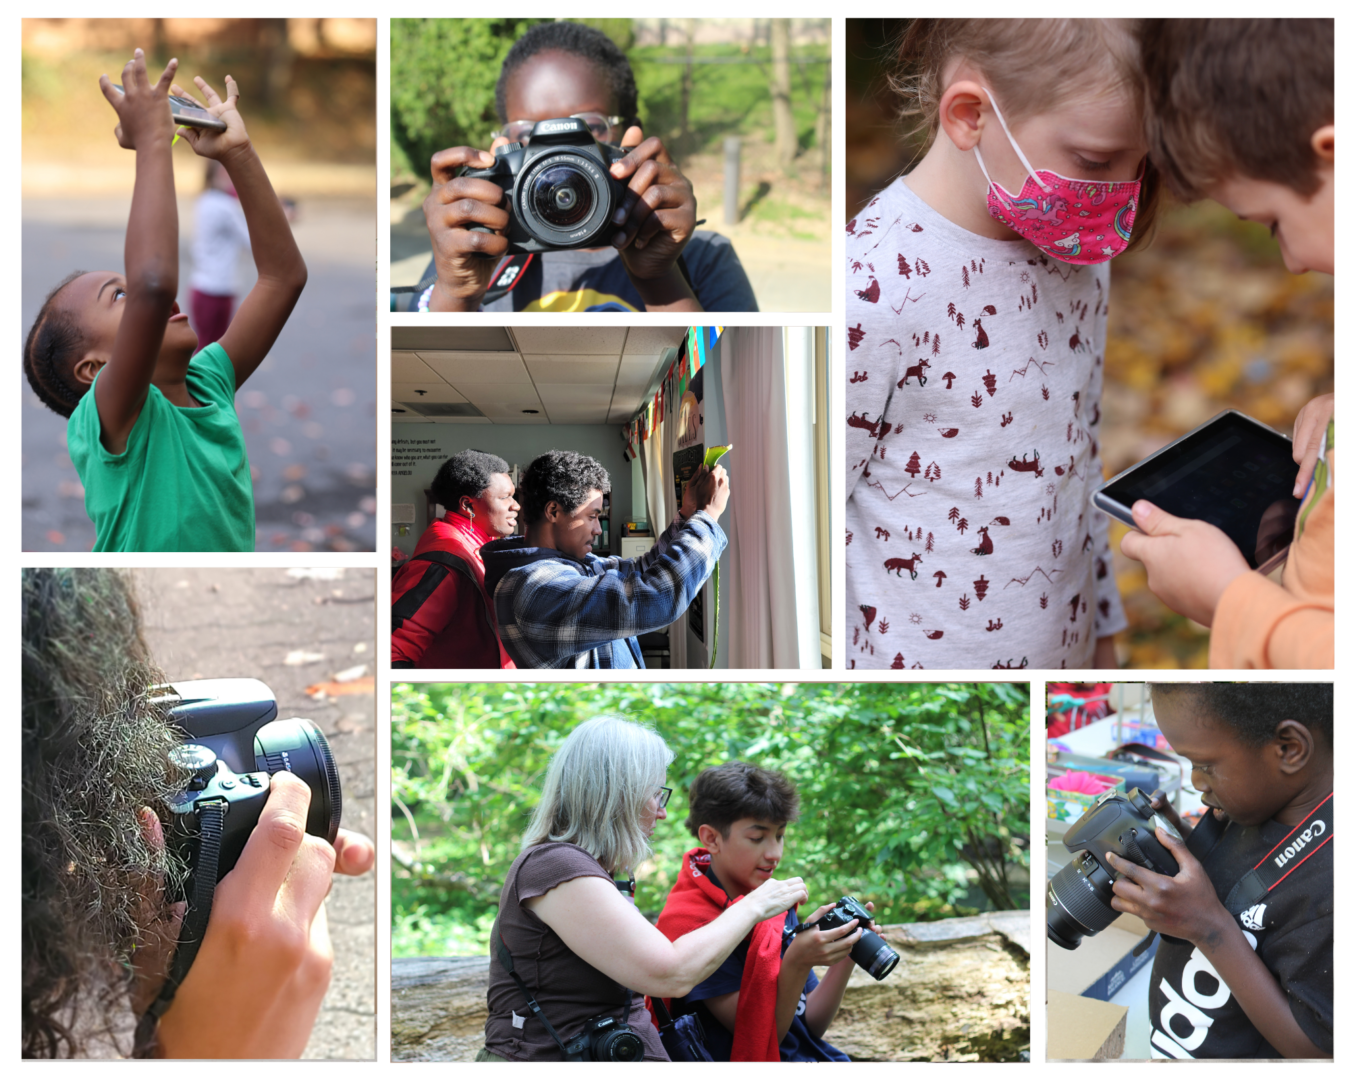 Photos of a diverse group of students using DSLR and cell phone cameras.